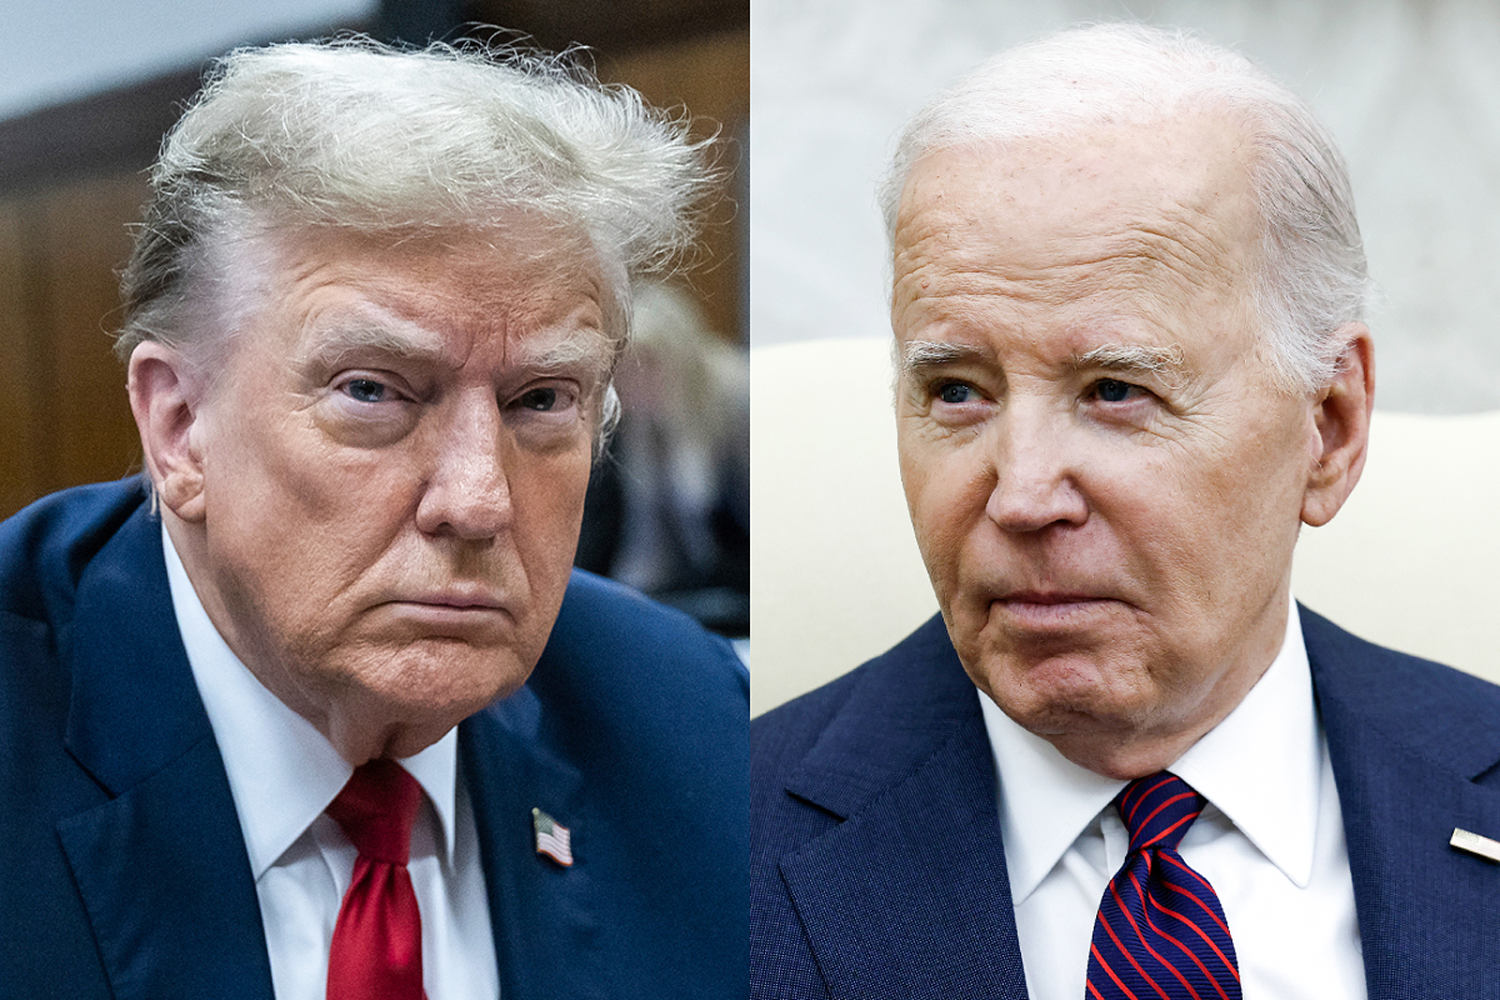 Biden should avoid walking into Trump's most obvious trap